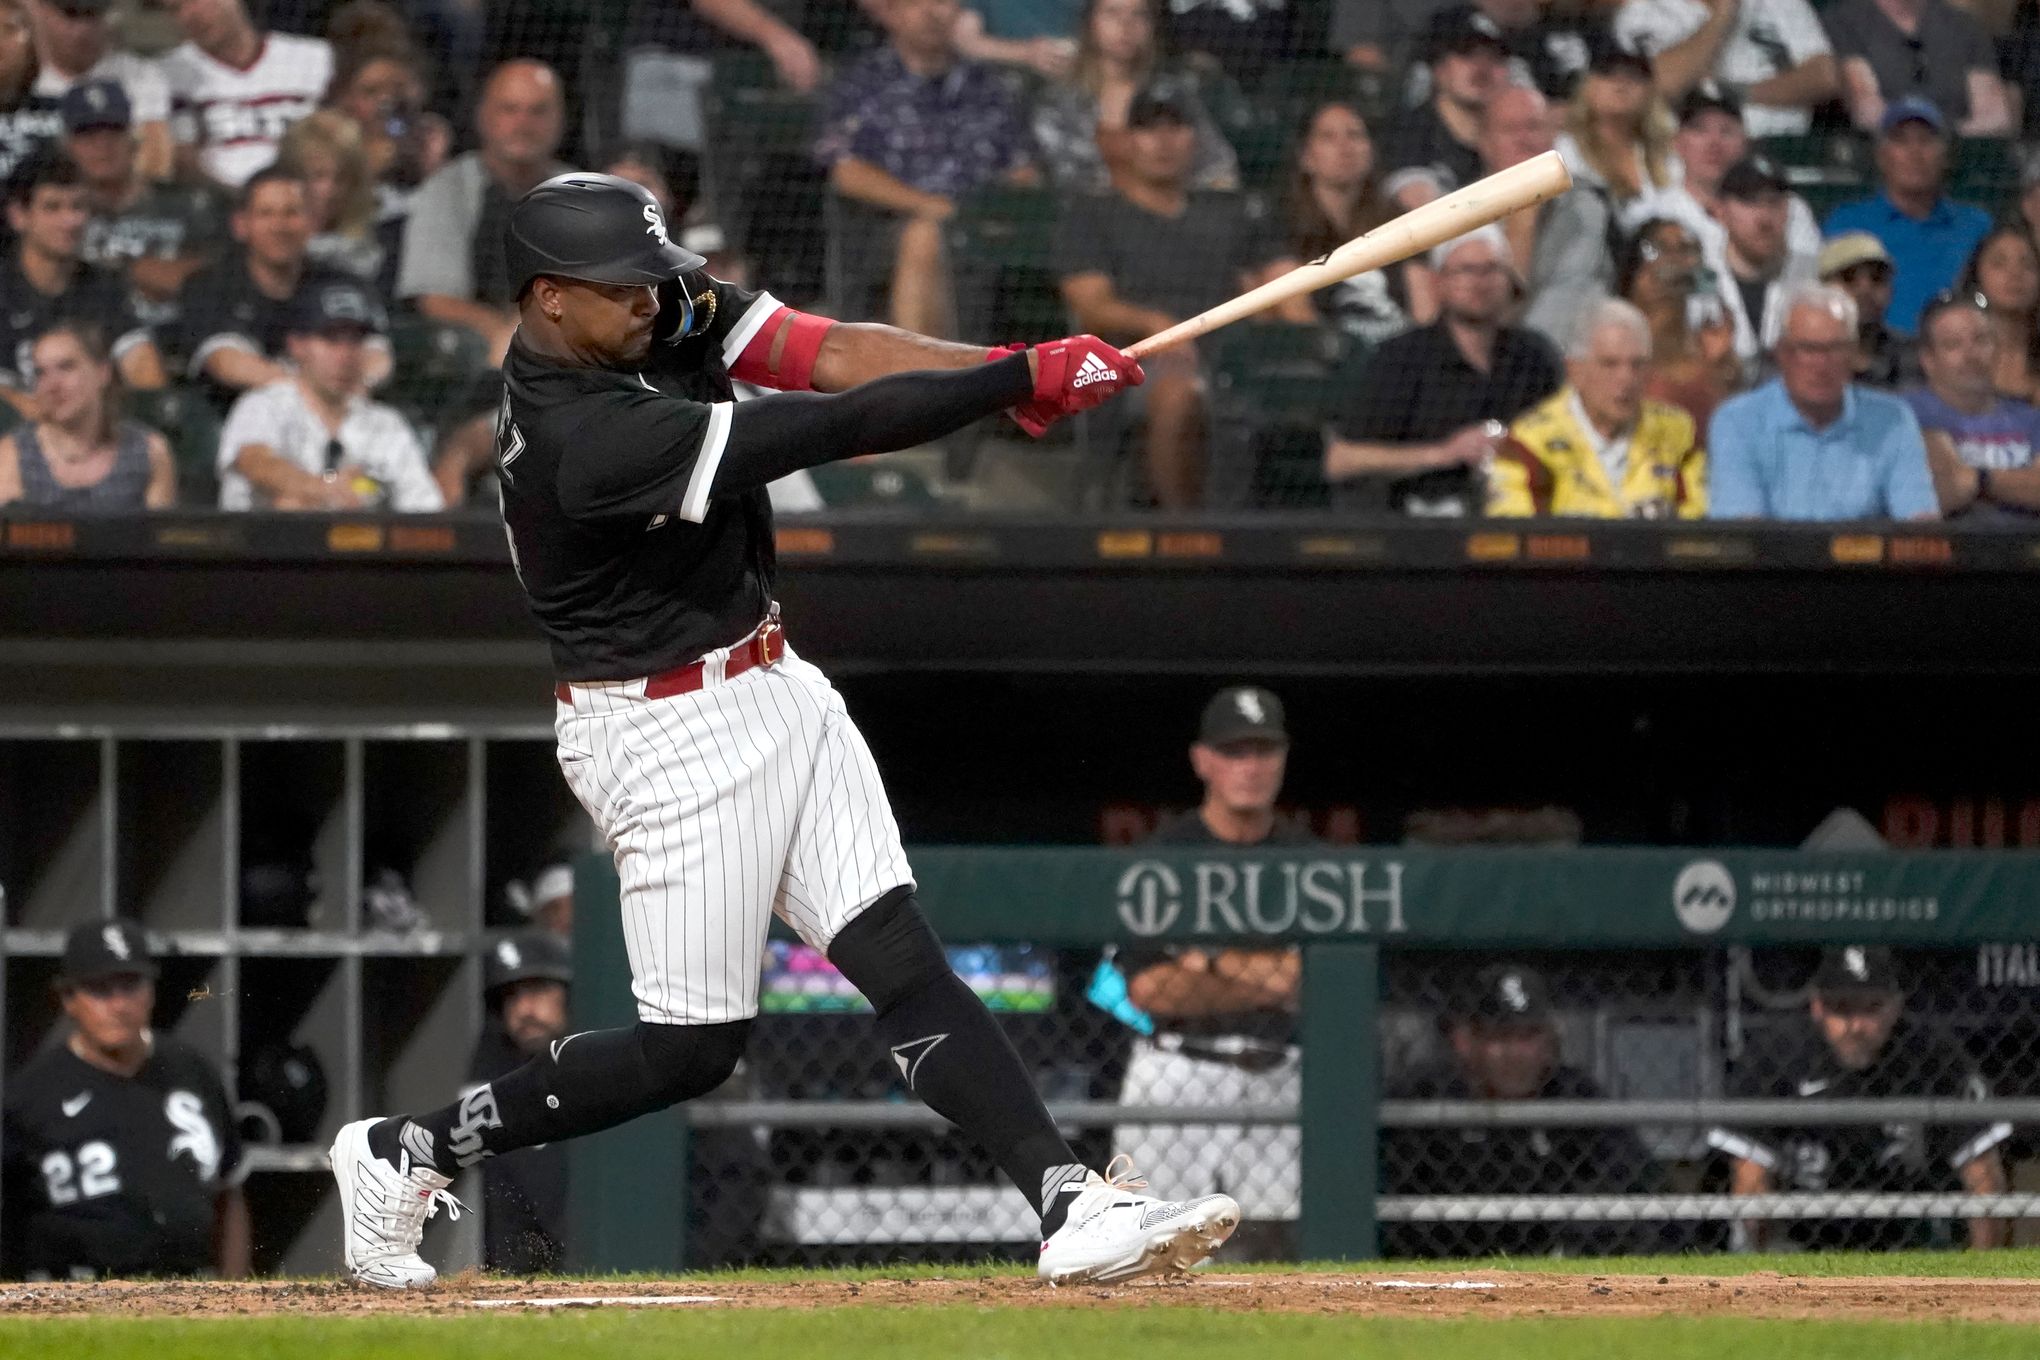 Eloy Jimenez could be a boost or trade candidate for the White Sox